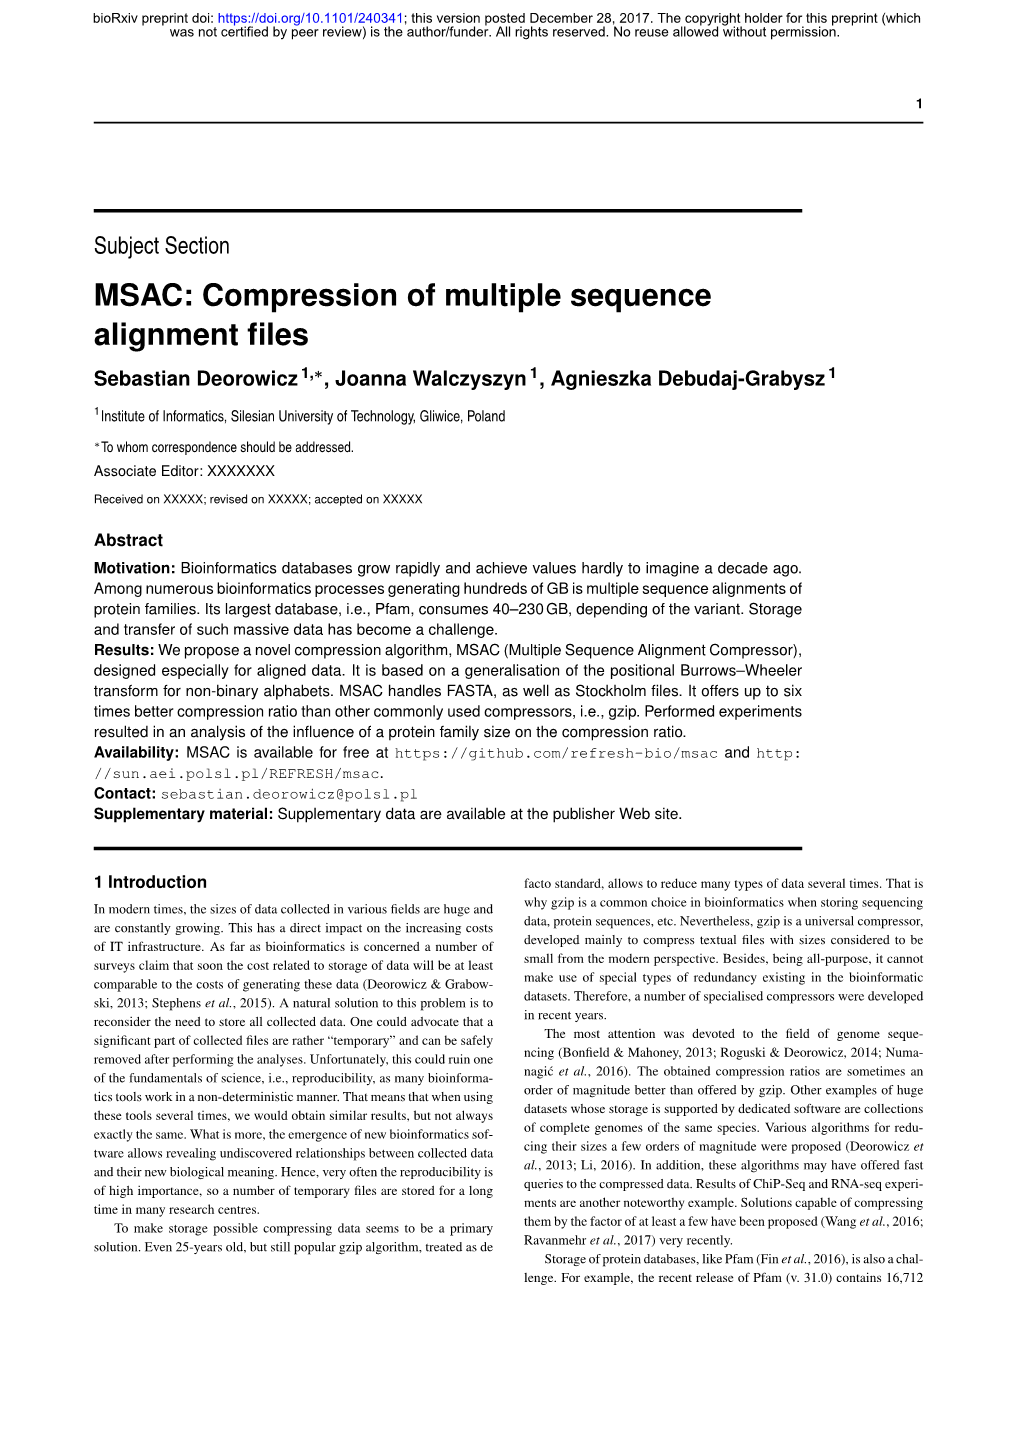 MSAC: Compression of Multiple Sequence Alignment Files